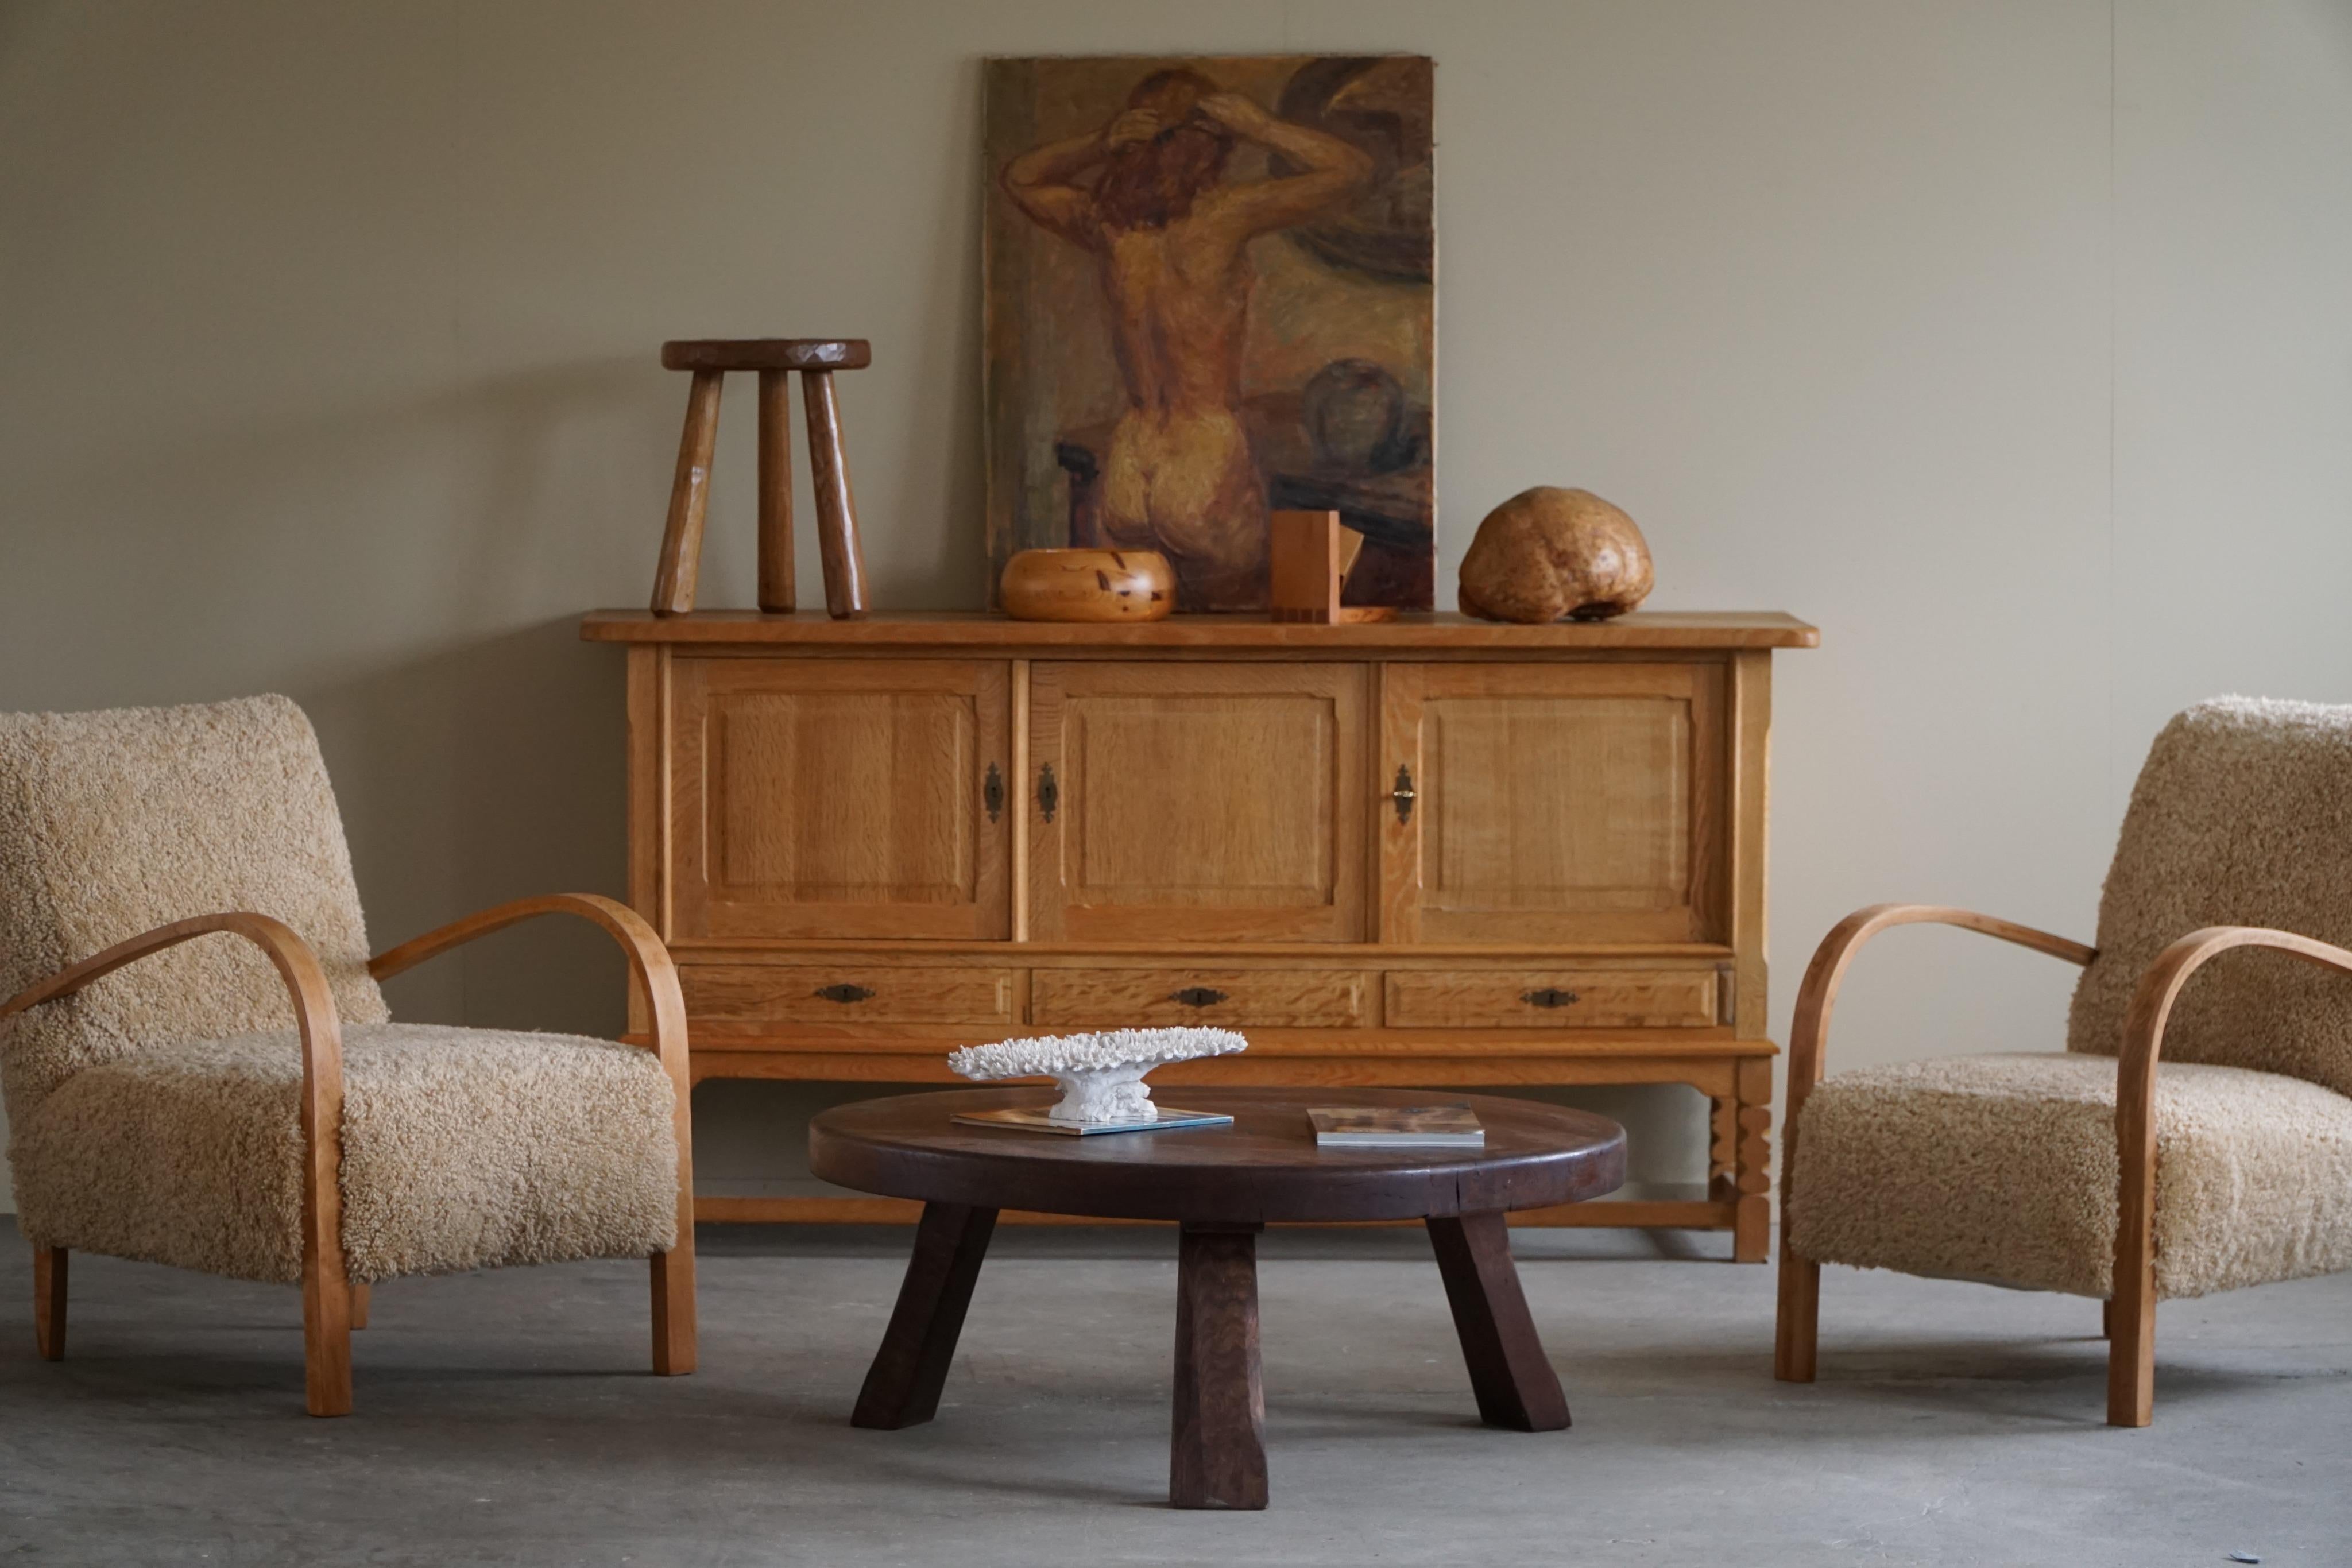 Appealing Classic Mid-Century Modern cabinet / sideboard made by a Danish cabinetmaker in the 1960s. The sideboard is made from high-quality oak, chosen for its durability and natural beauty. The wood is lightly oiled to bring out its grain and